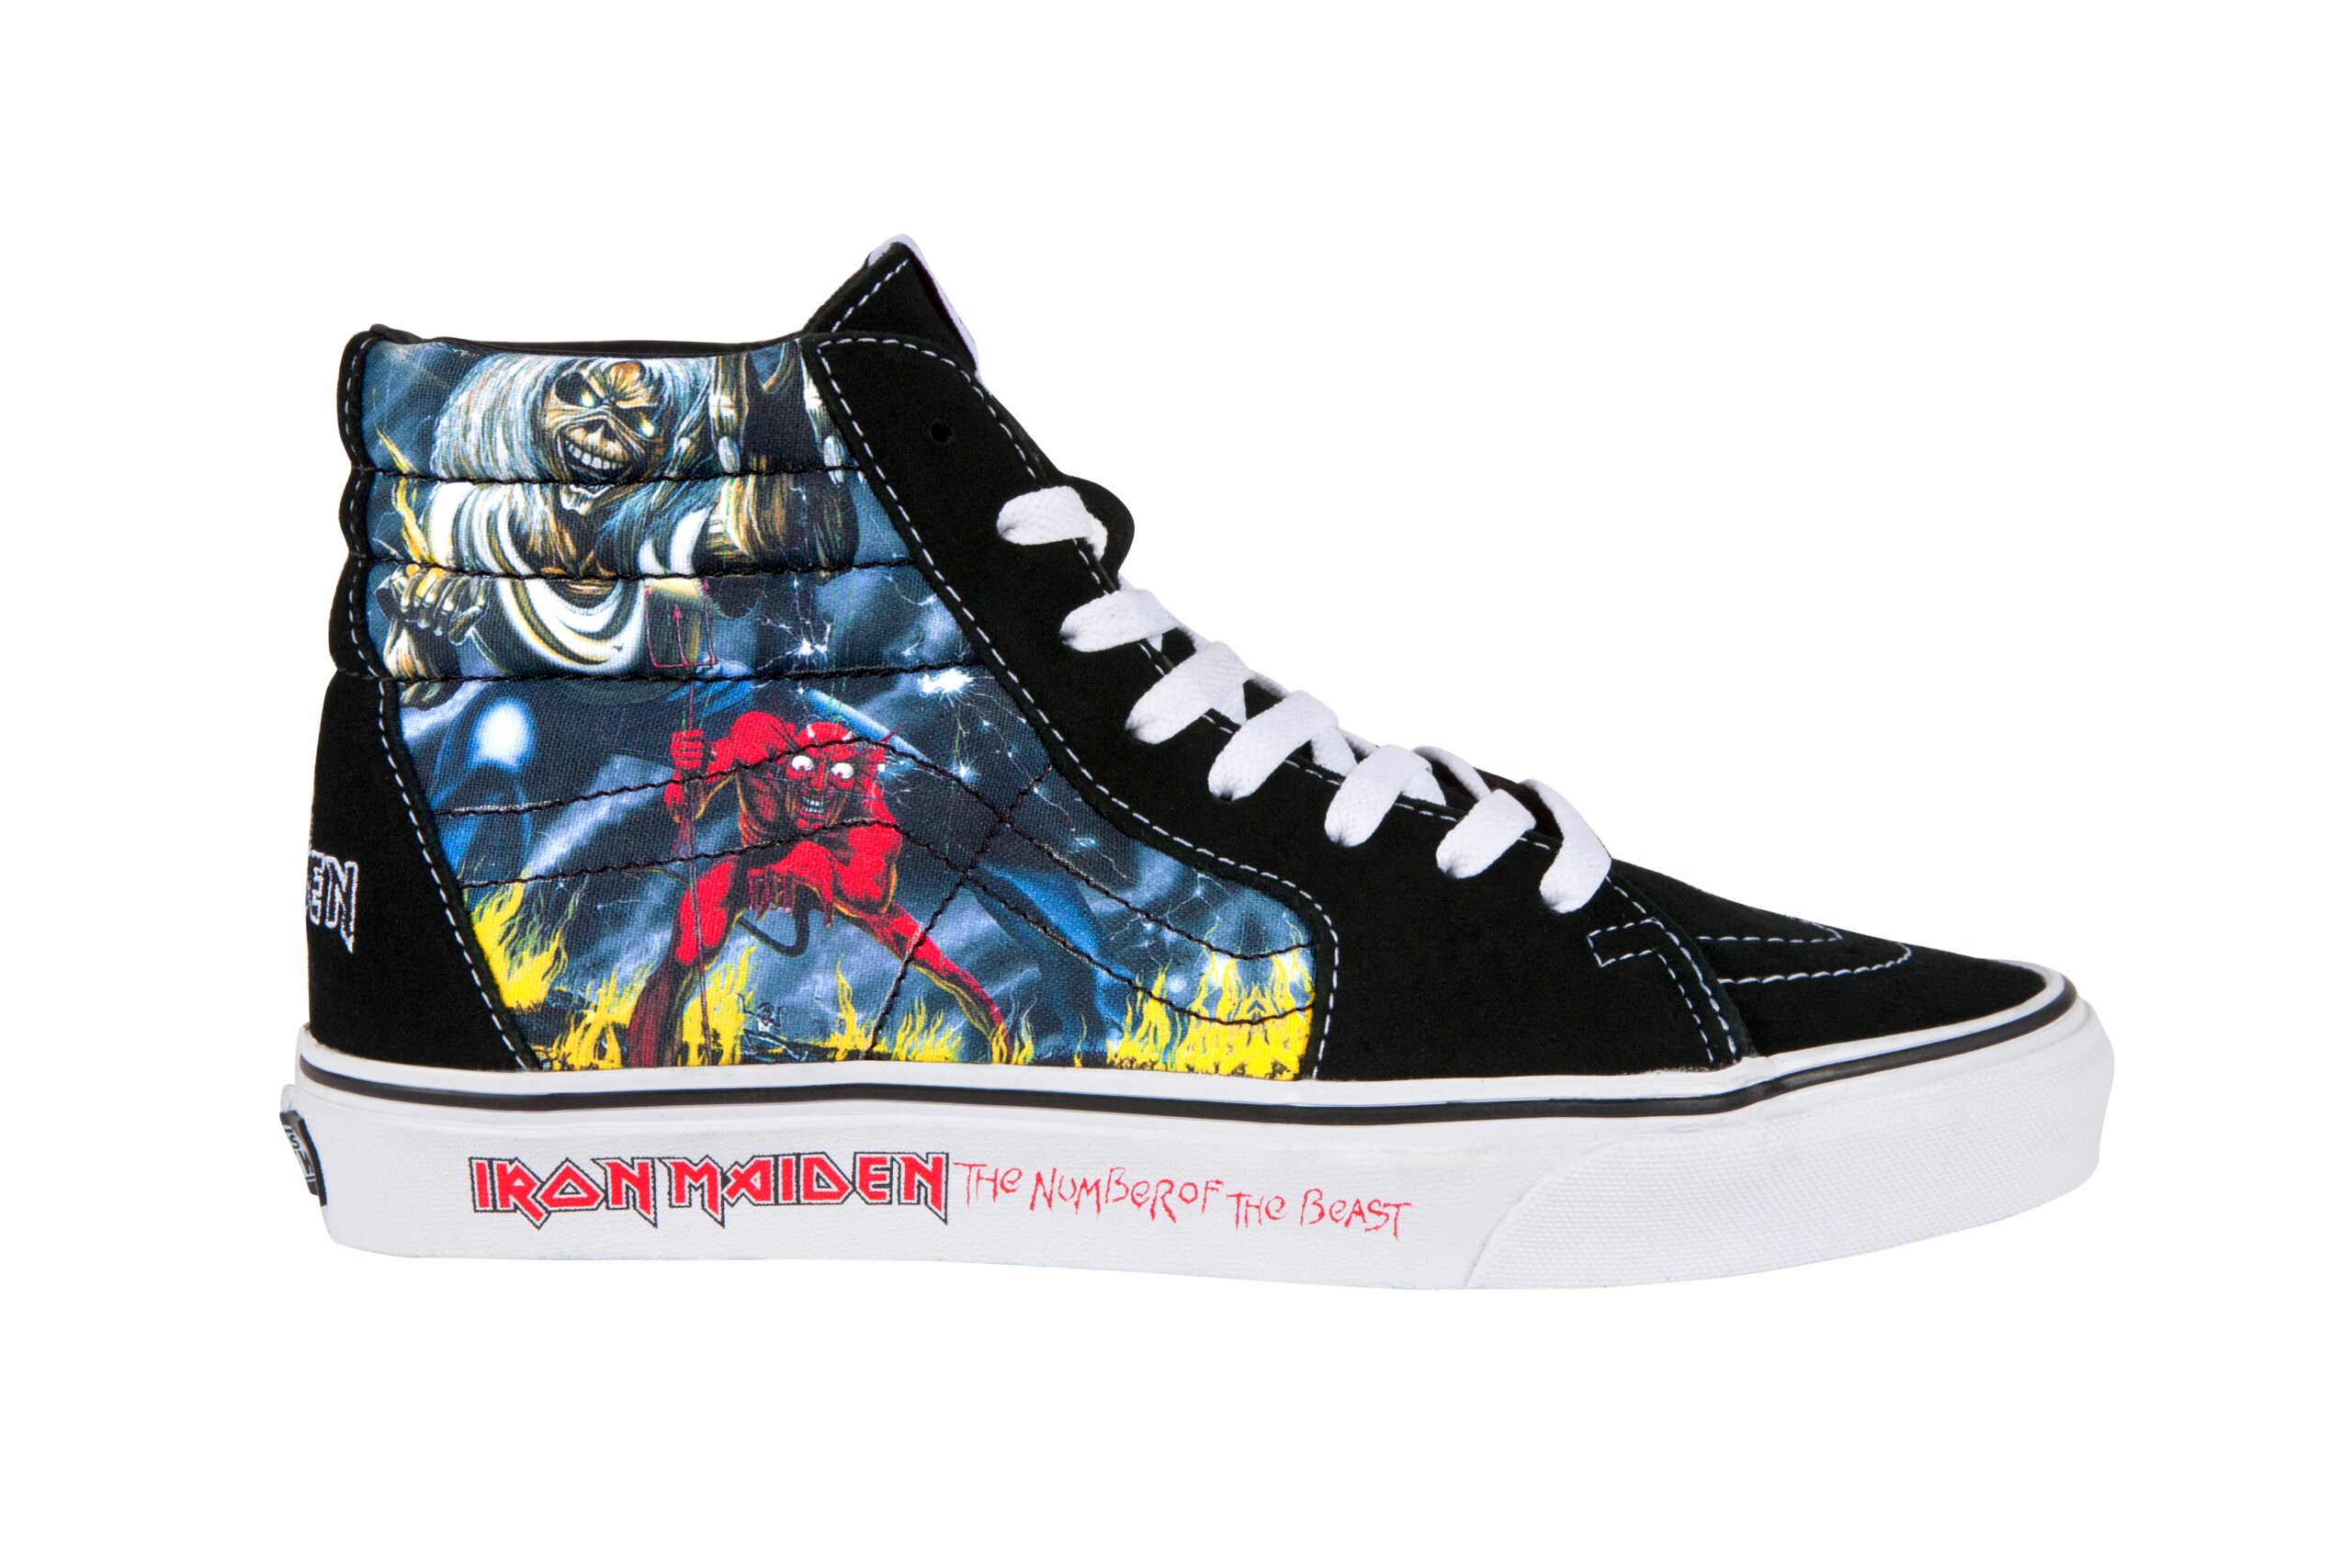 Iron Maiden x Vans ‘The Number of the Beast’ Collection